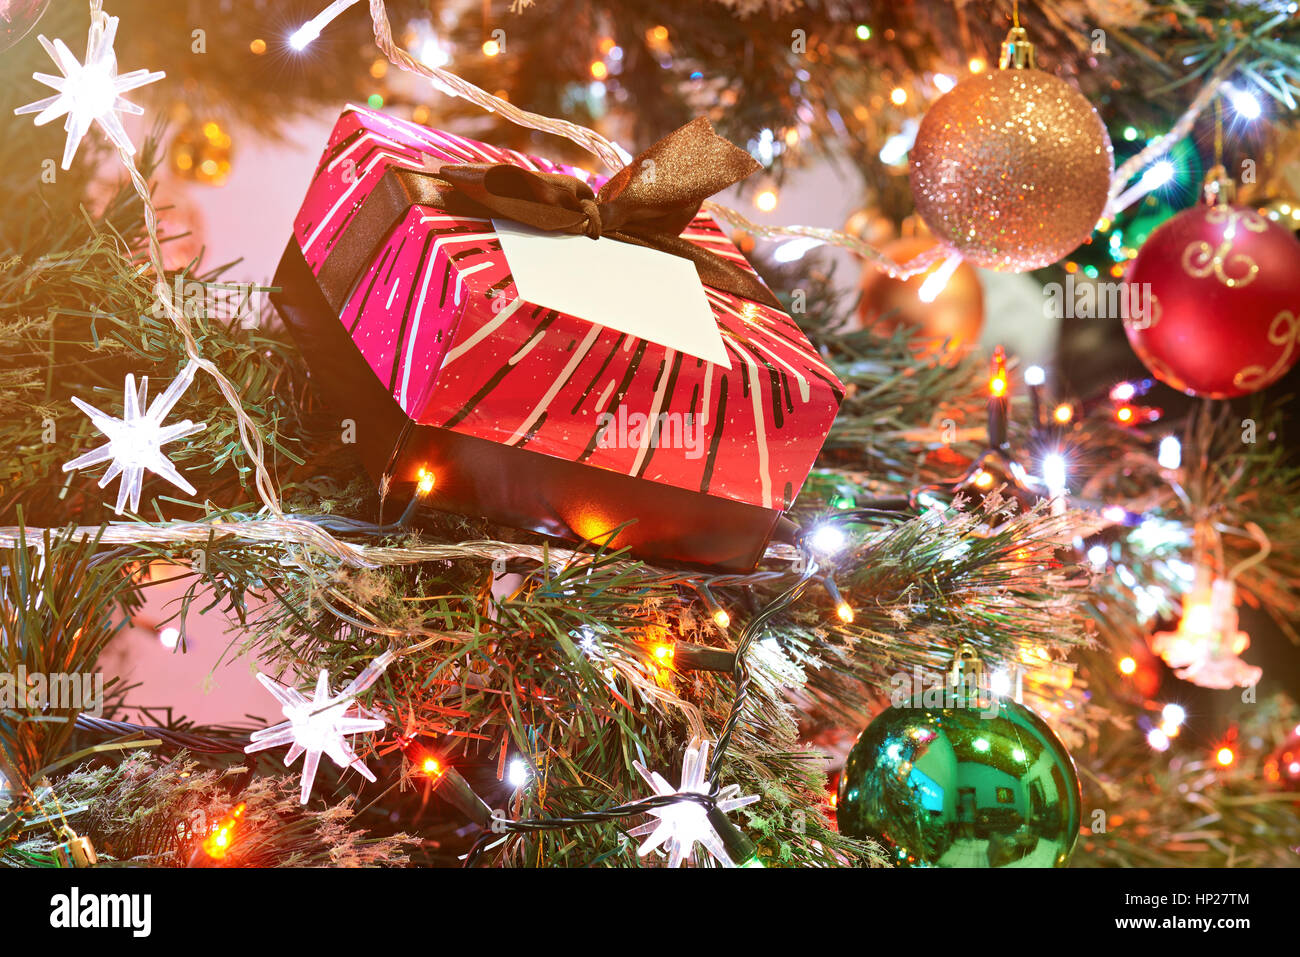 gift laying on christmas tree with decorations on background Stock Photo